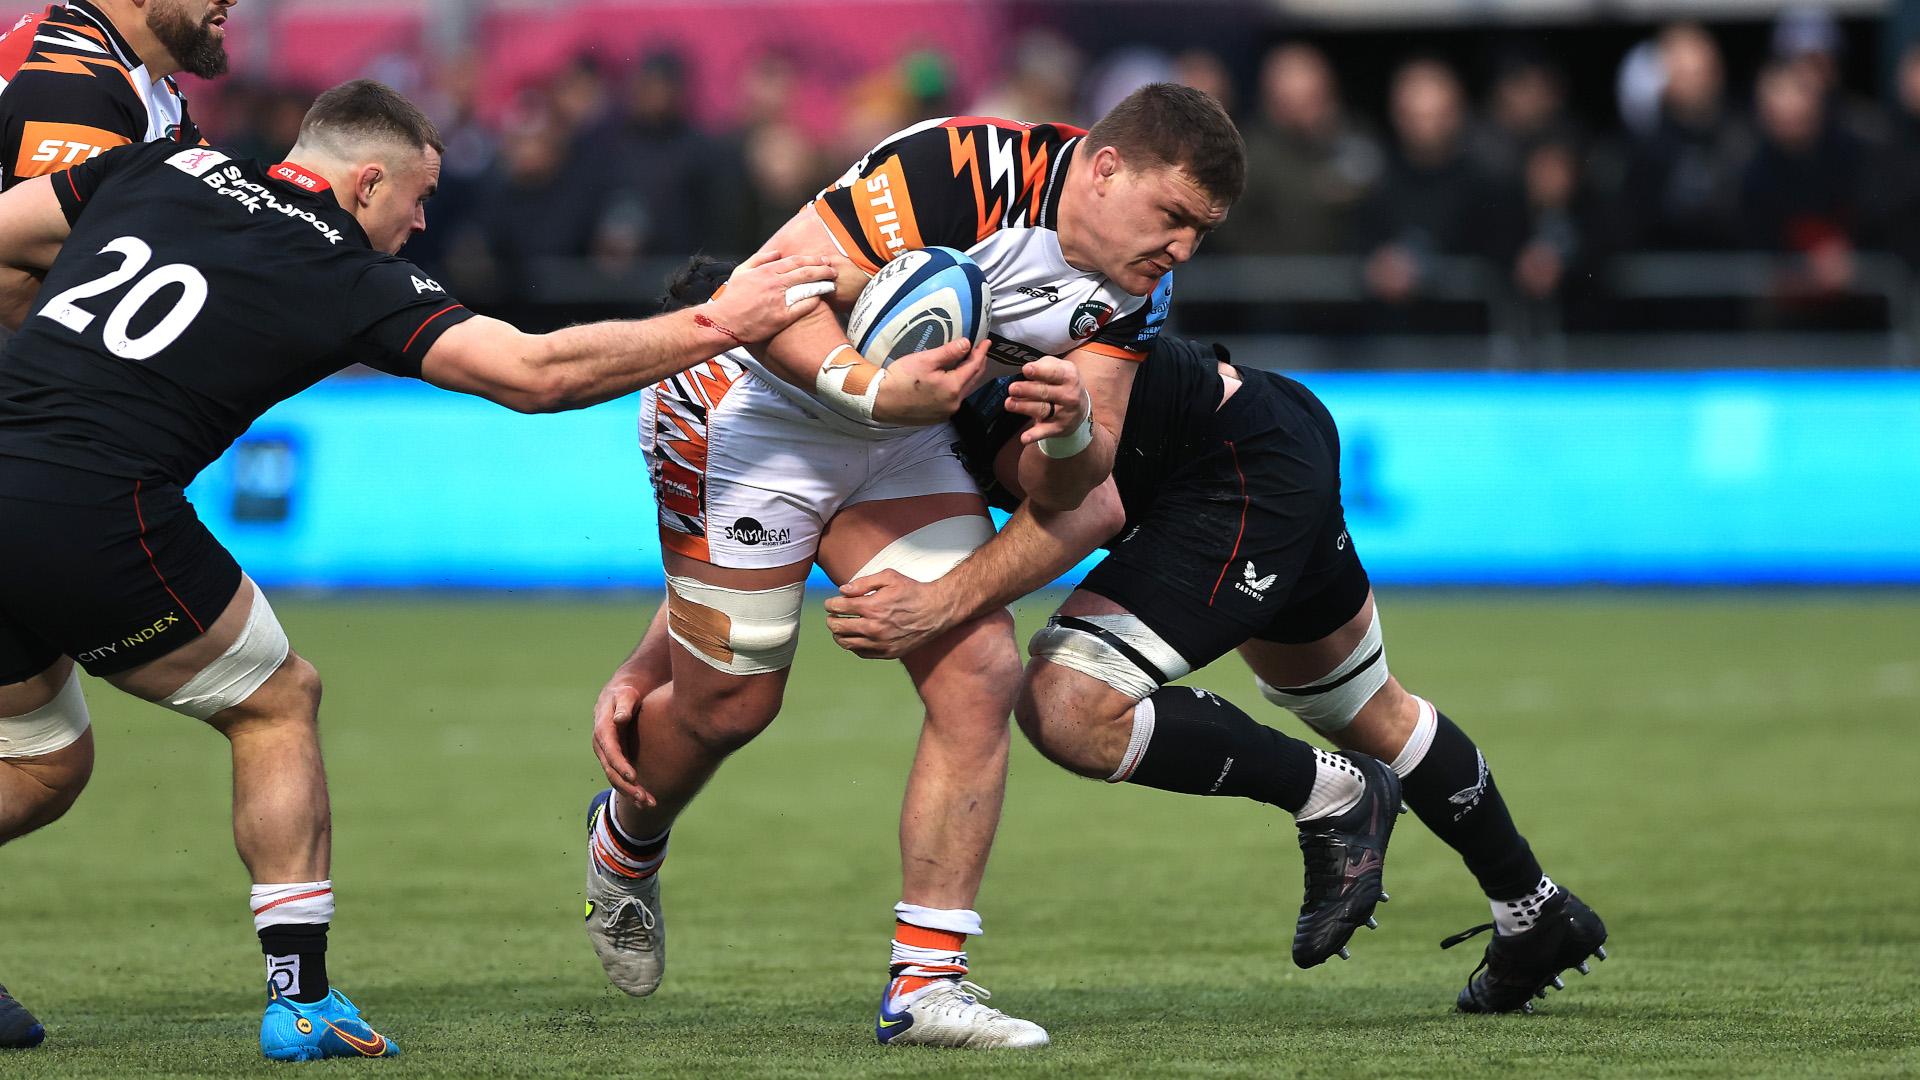 Leicester Tigers vs Saracens live stream and how to watch the 2022 Premiership Rugby Final for free, online and on TV What Hi-Fi?